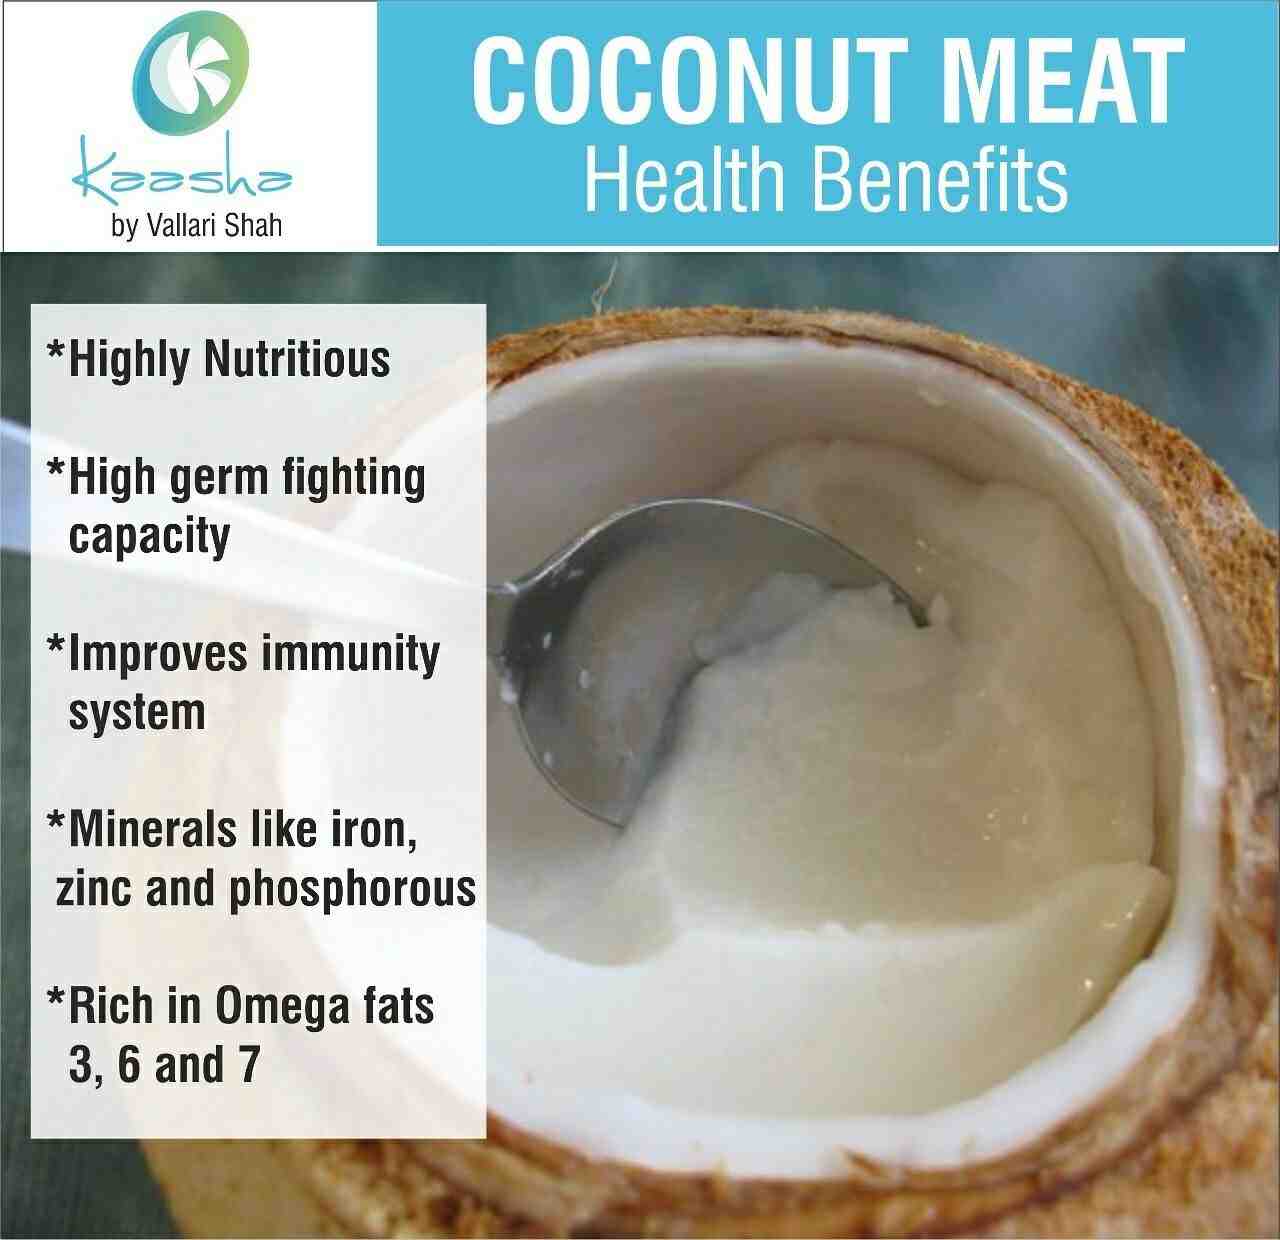 What are the benefits of eating coconut meat?